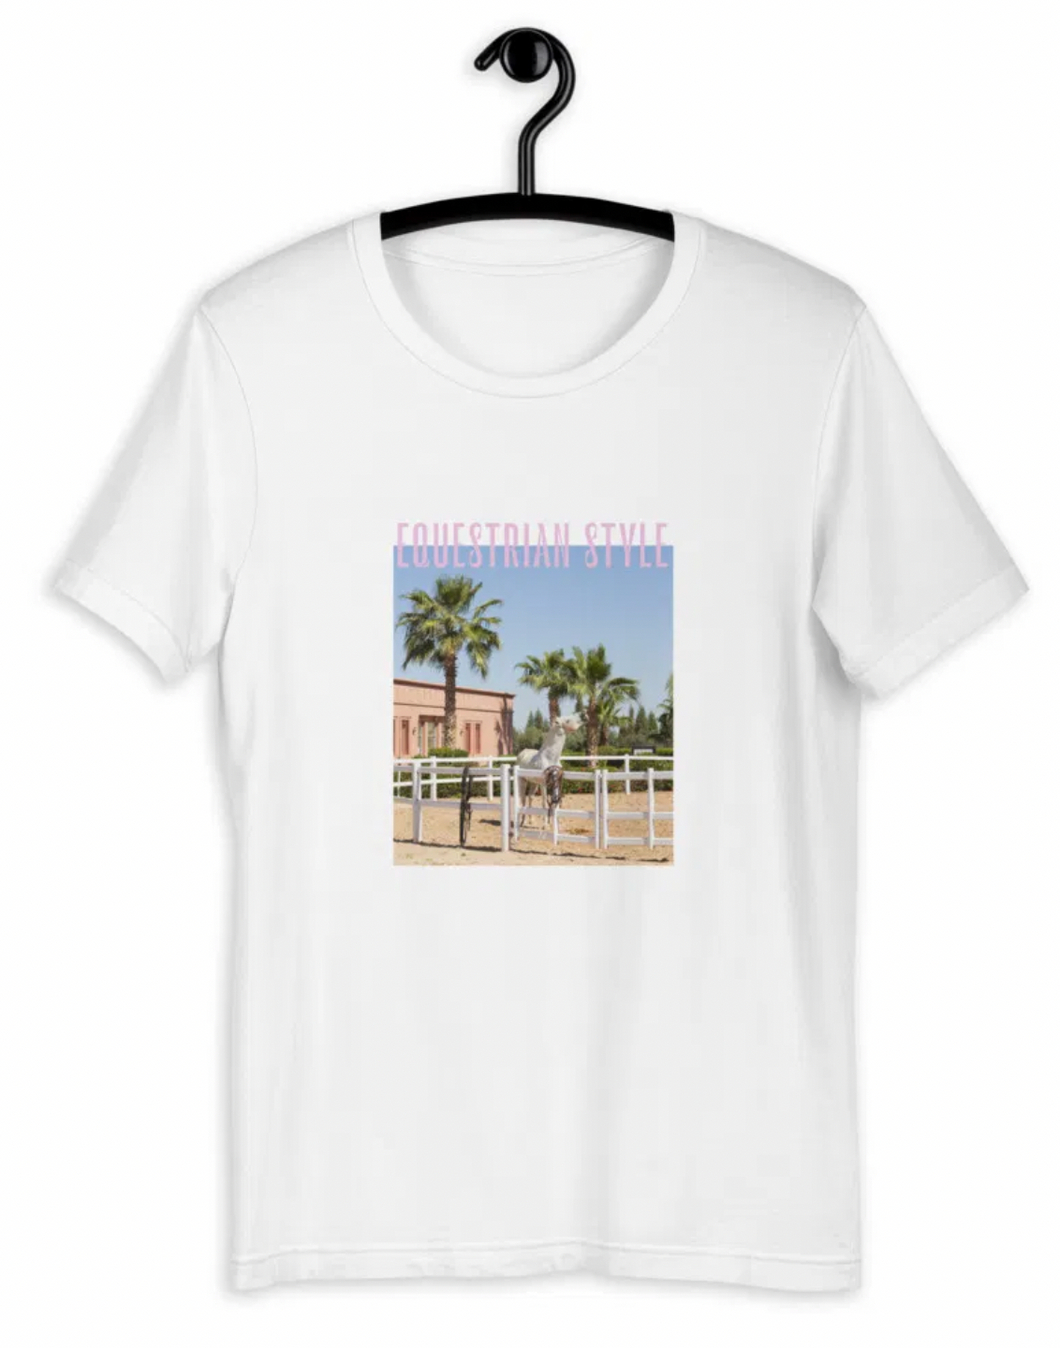 Collection équine - Tee Shirt Equestrian Style blanc